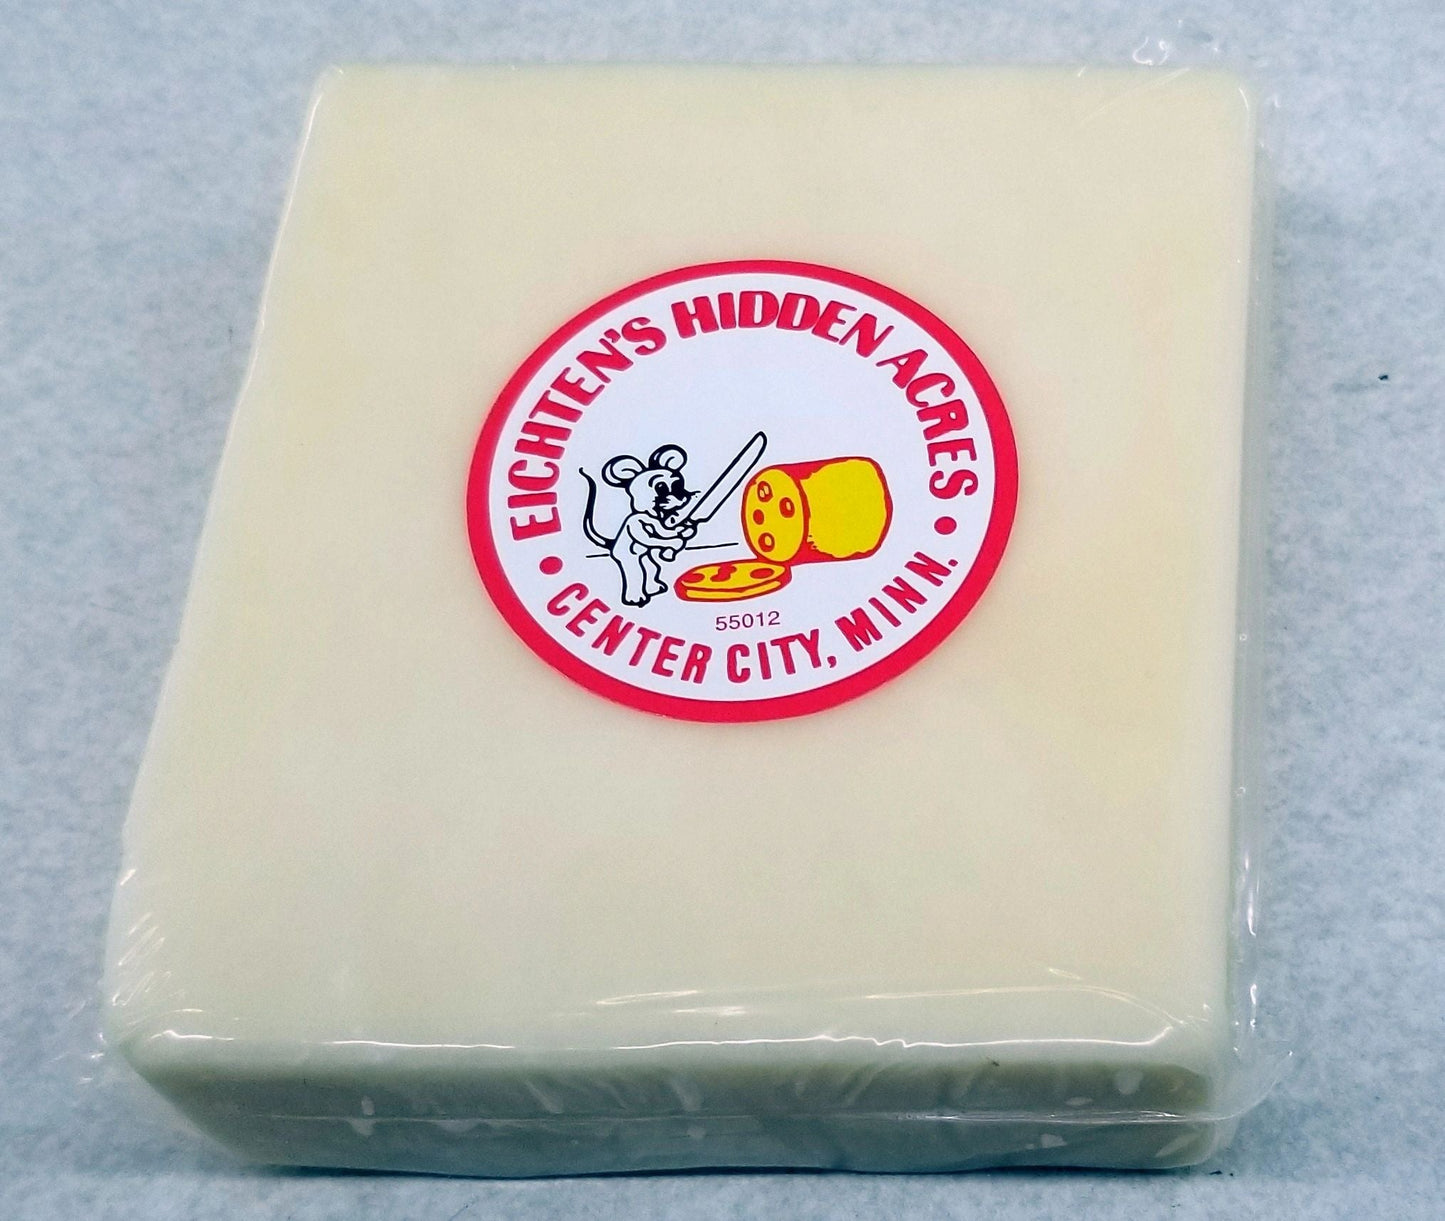 Cheddar Cheese, White, Aged 1 Year 8 oz - Eichtens Cheeses, Gifts & FoodsAll Products